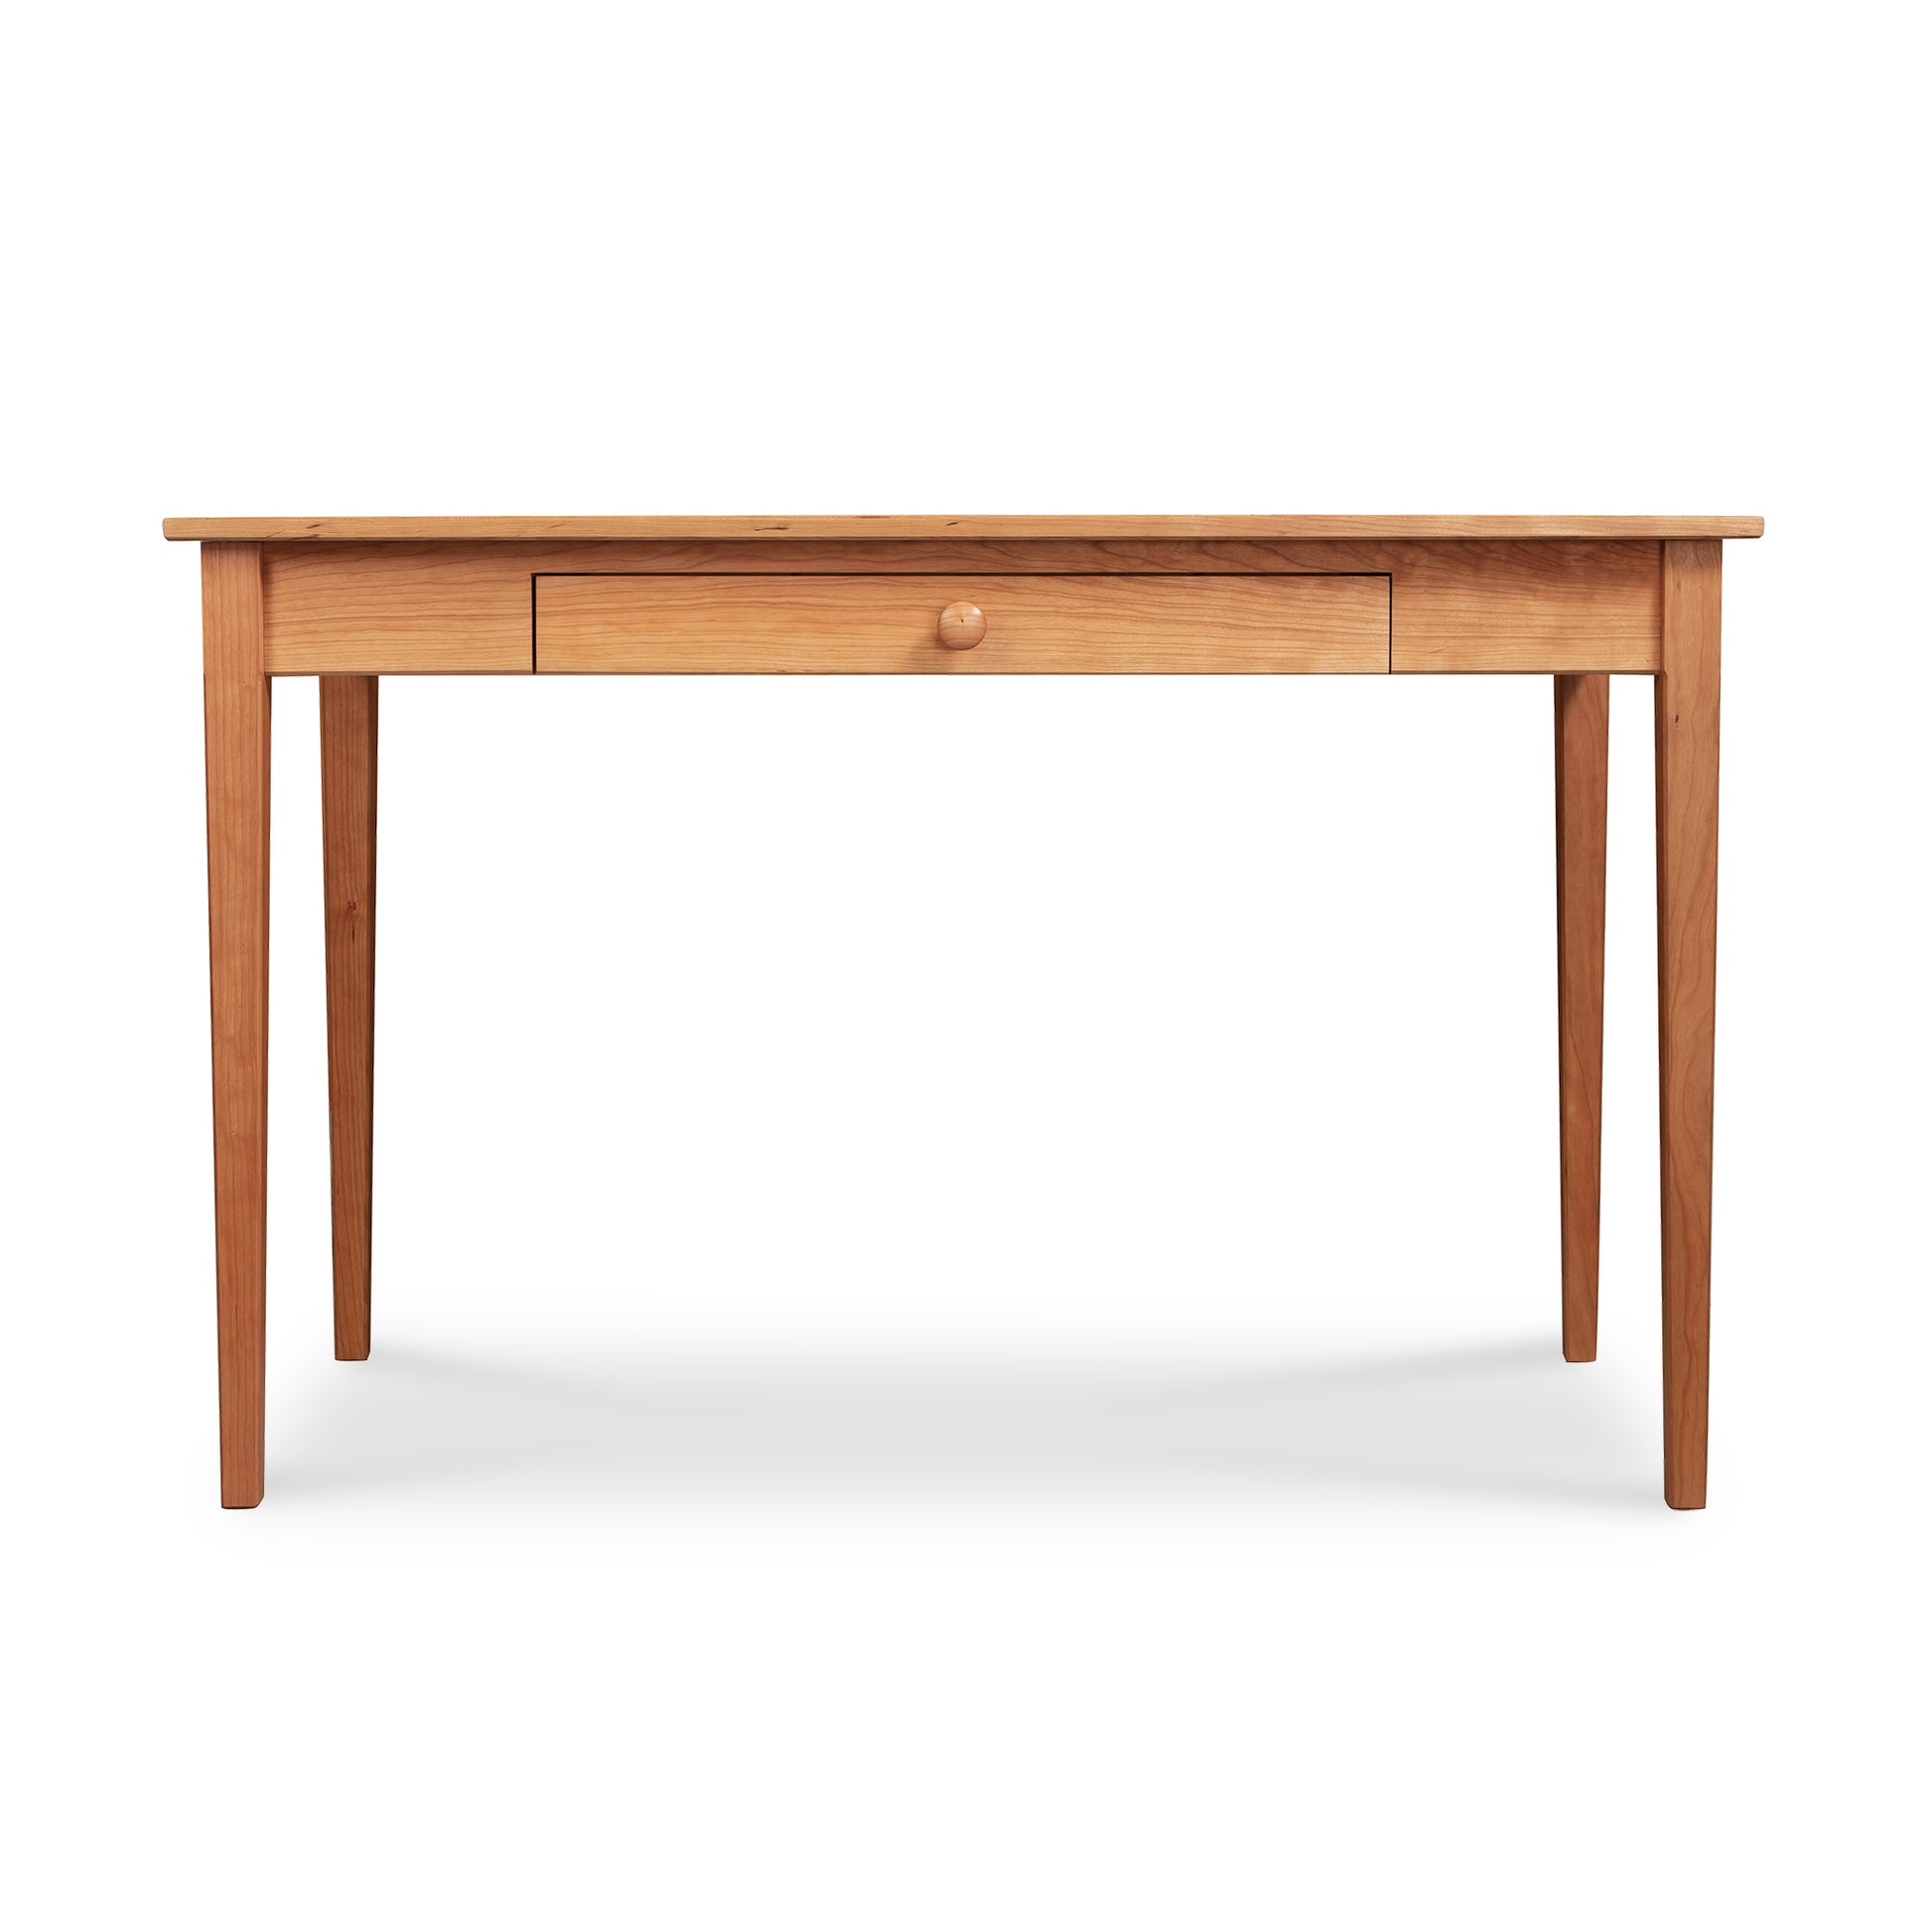 A Maple Corner Woodworks Vermont Shaker Writing Desk with a single central drawer, featuring round knob handle, against a white background.